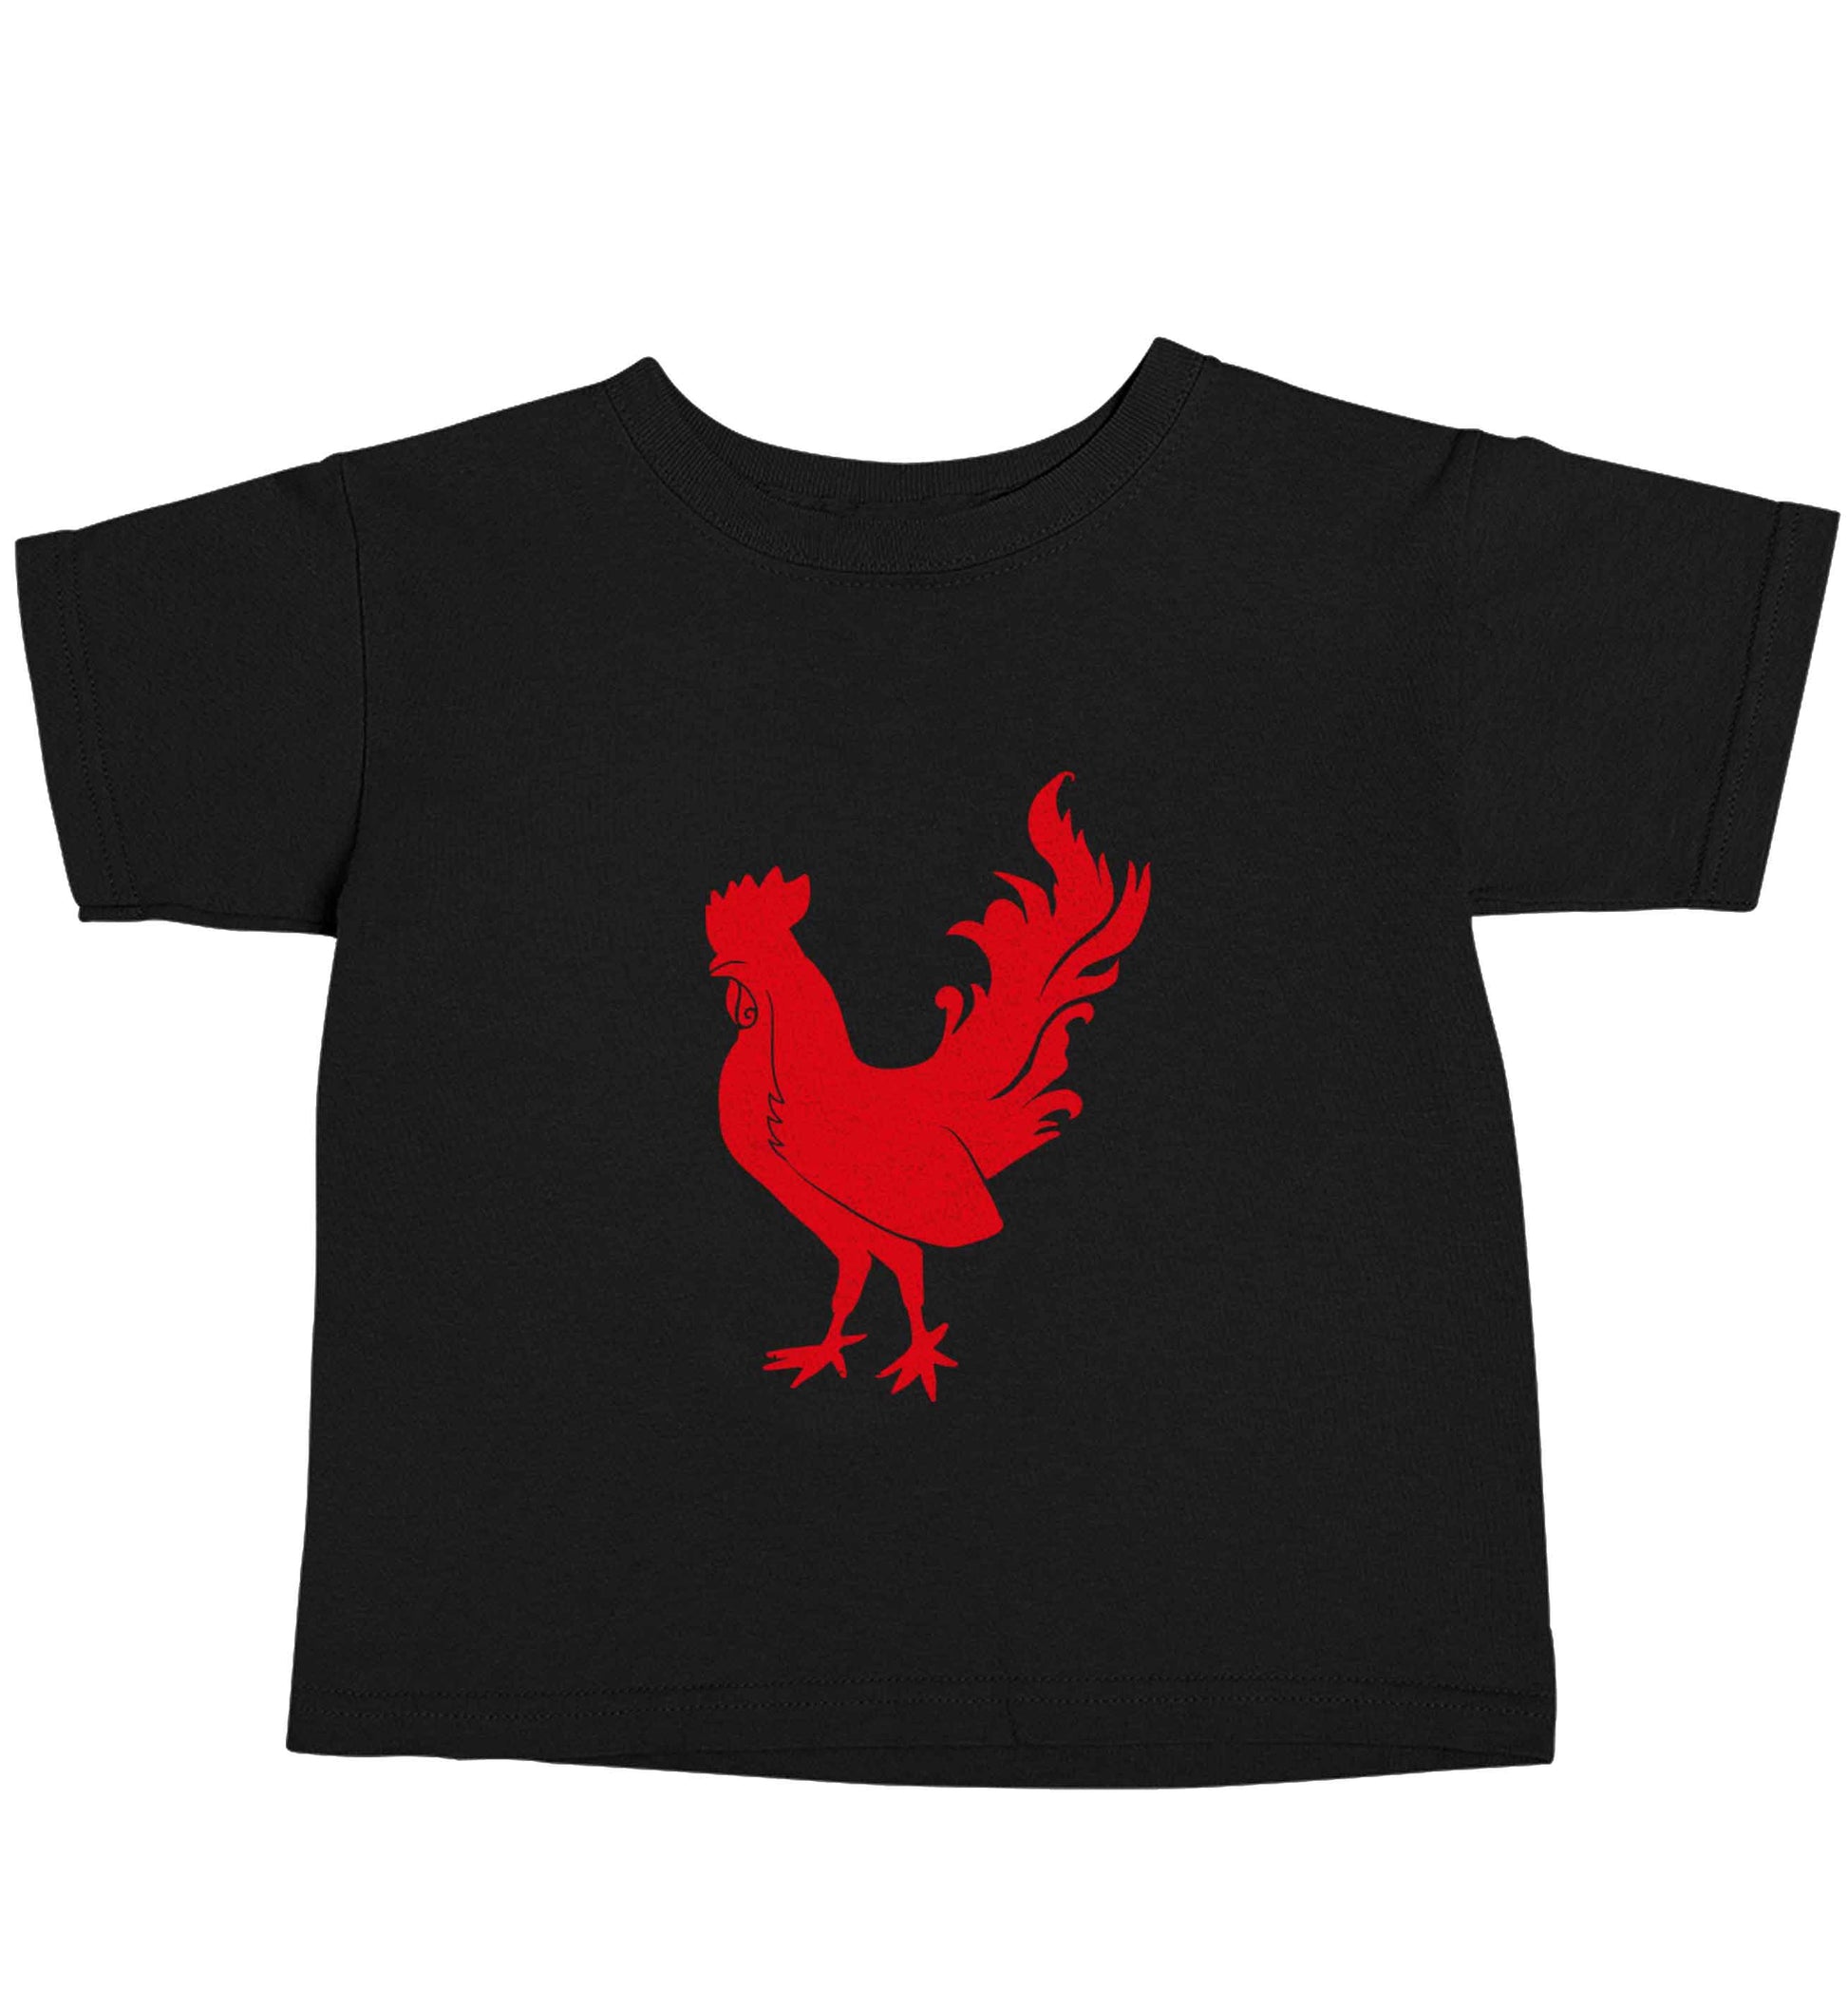 Rooster Black baby toddler Tshirt 2 years